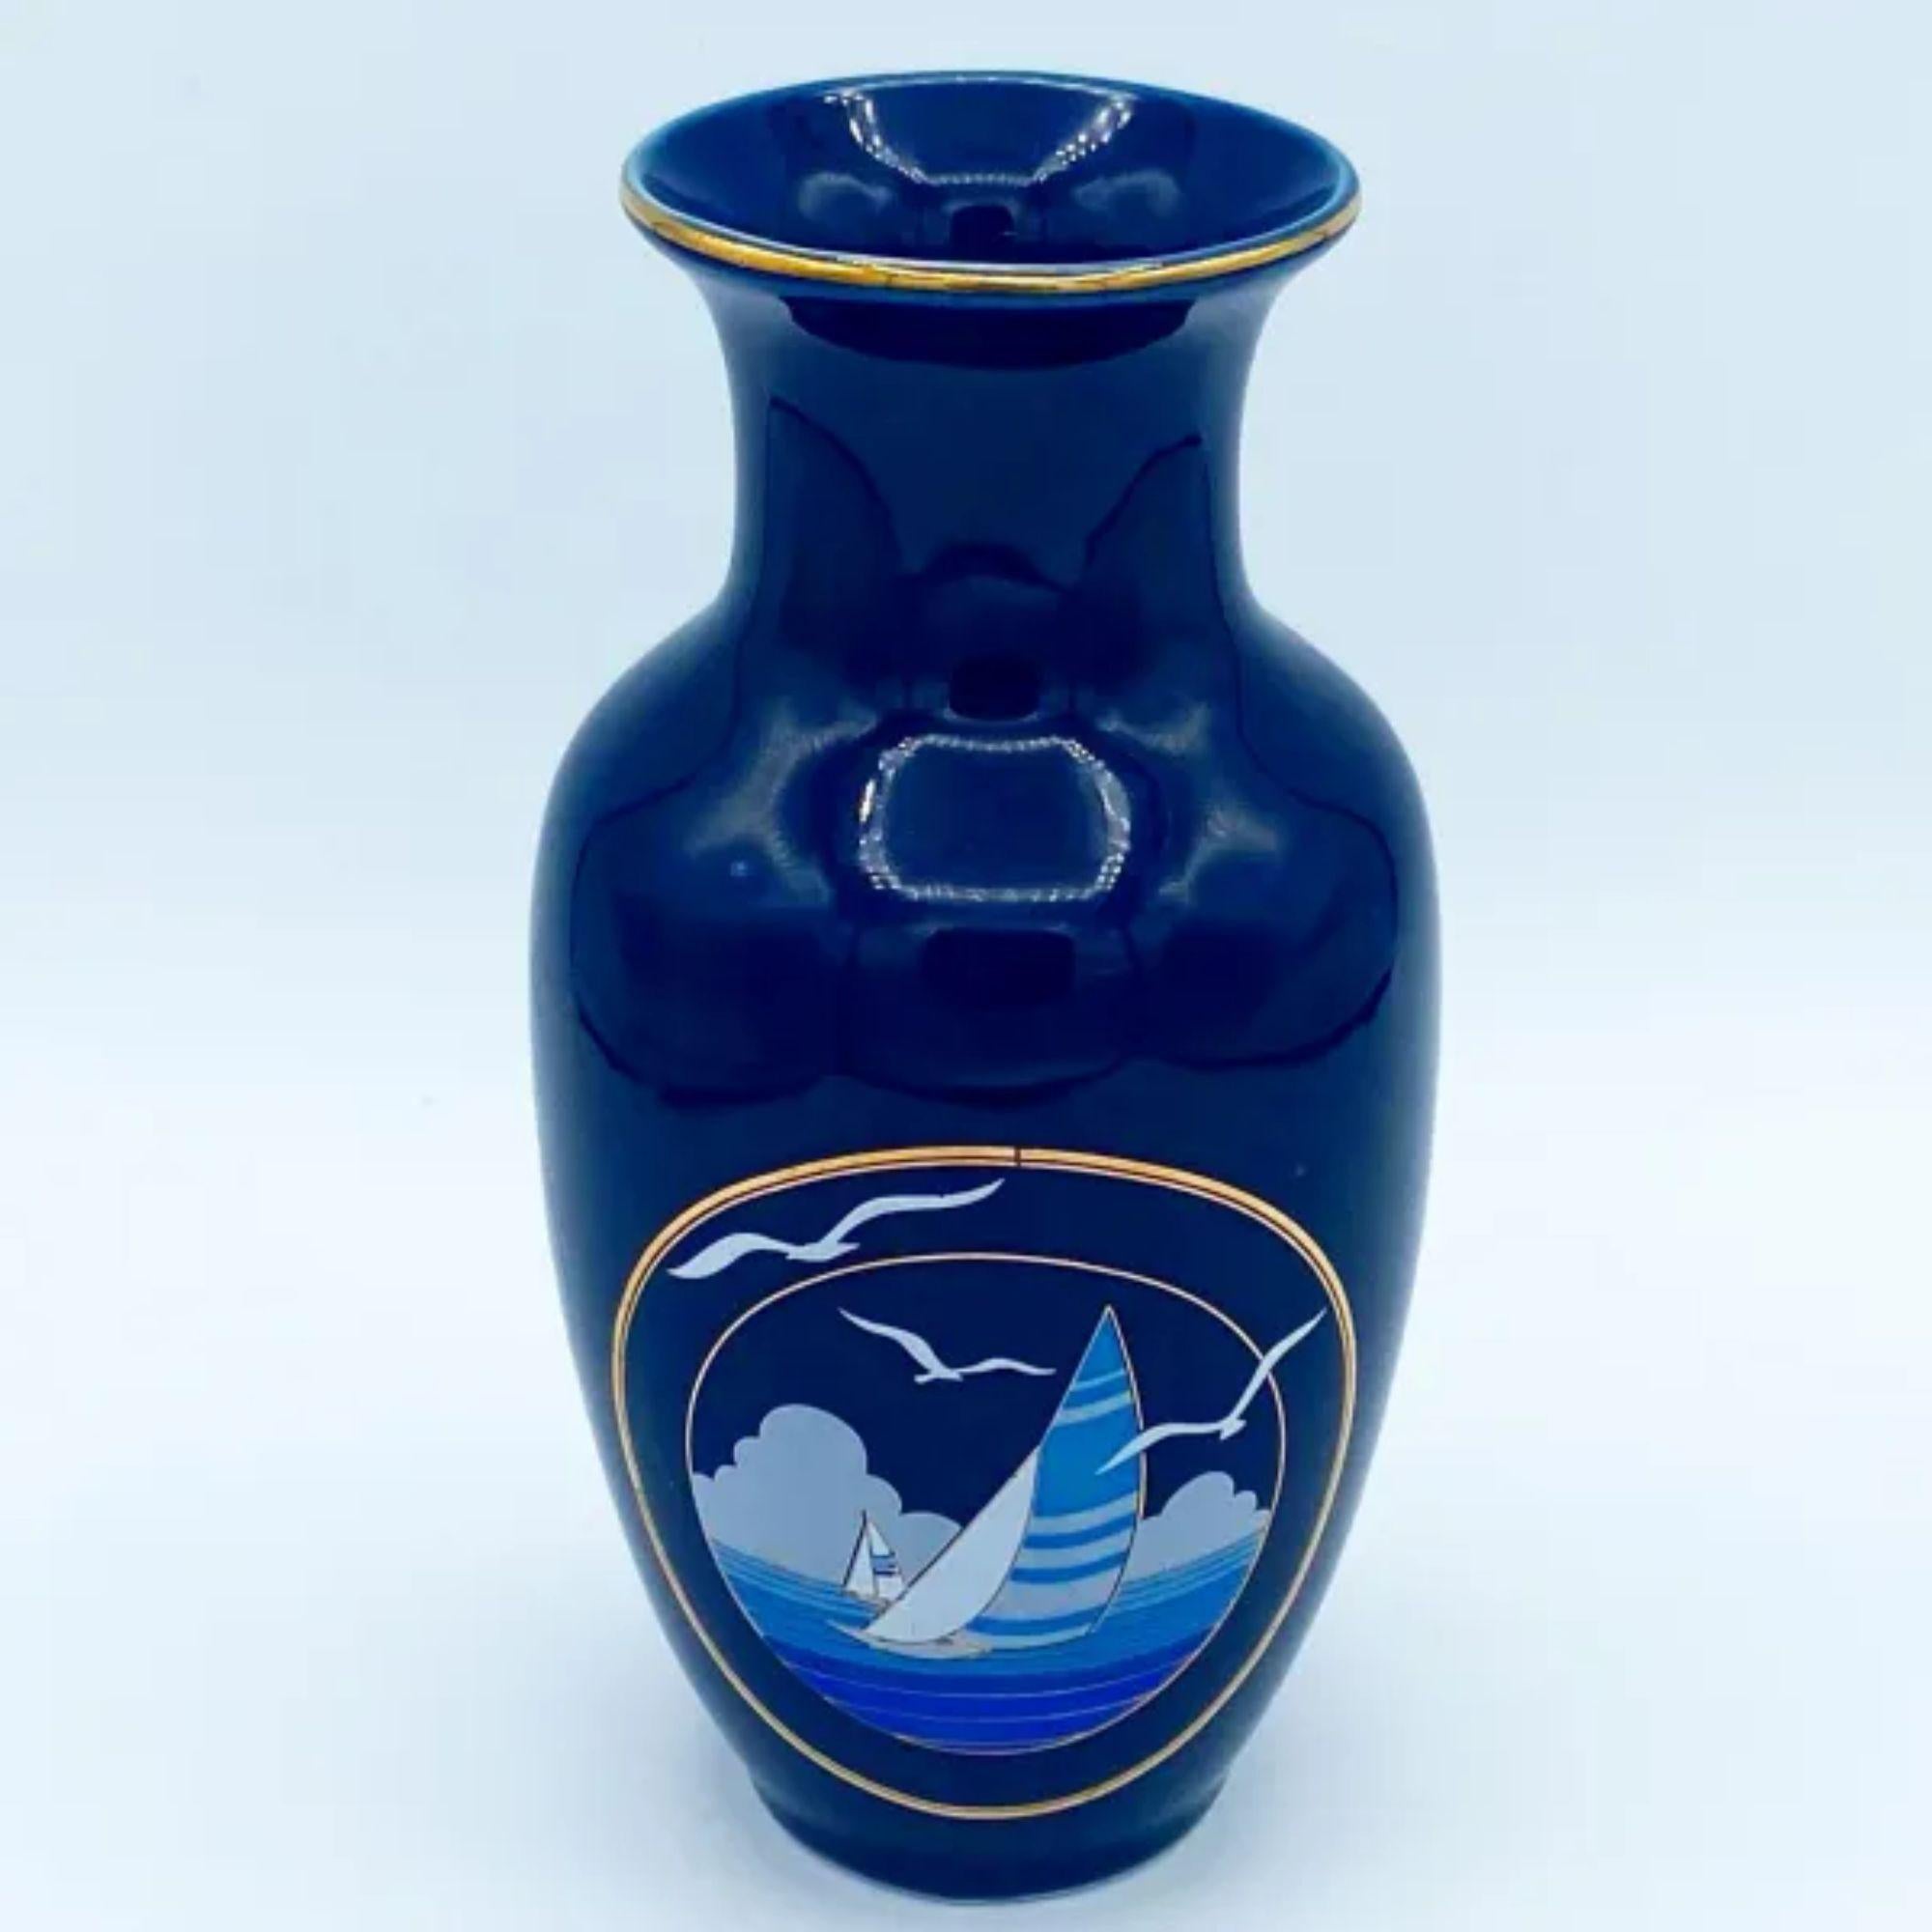 Depicts sailboats at sea with pelicans and clouds on the horizon.

Additional information: 
Material: Porcelain
Color: Blue
Style: Mid-Century, Vintage
Brand: Jordan’s
Time Period: 1960s
Place of origin: Japan
Dimension: 3” L x 3” D x 6.25” H